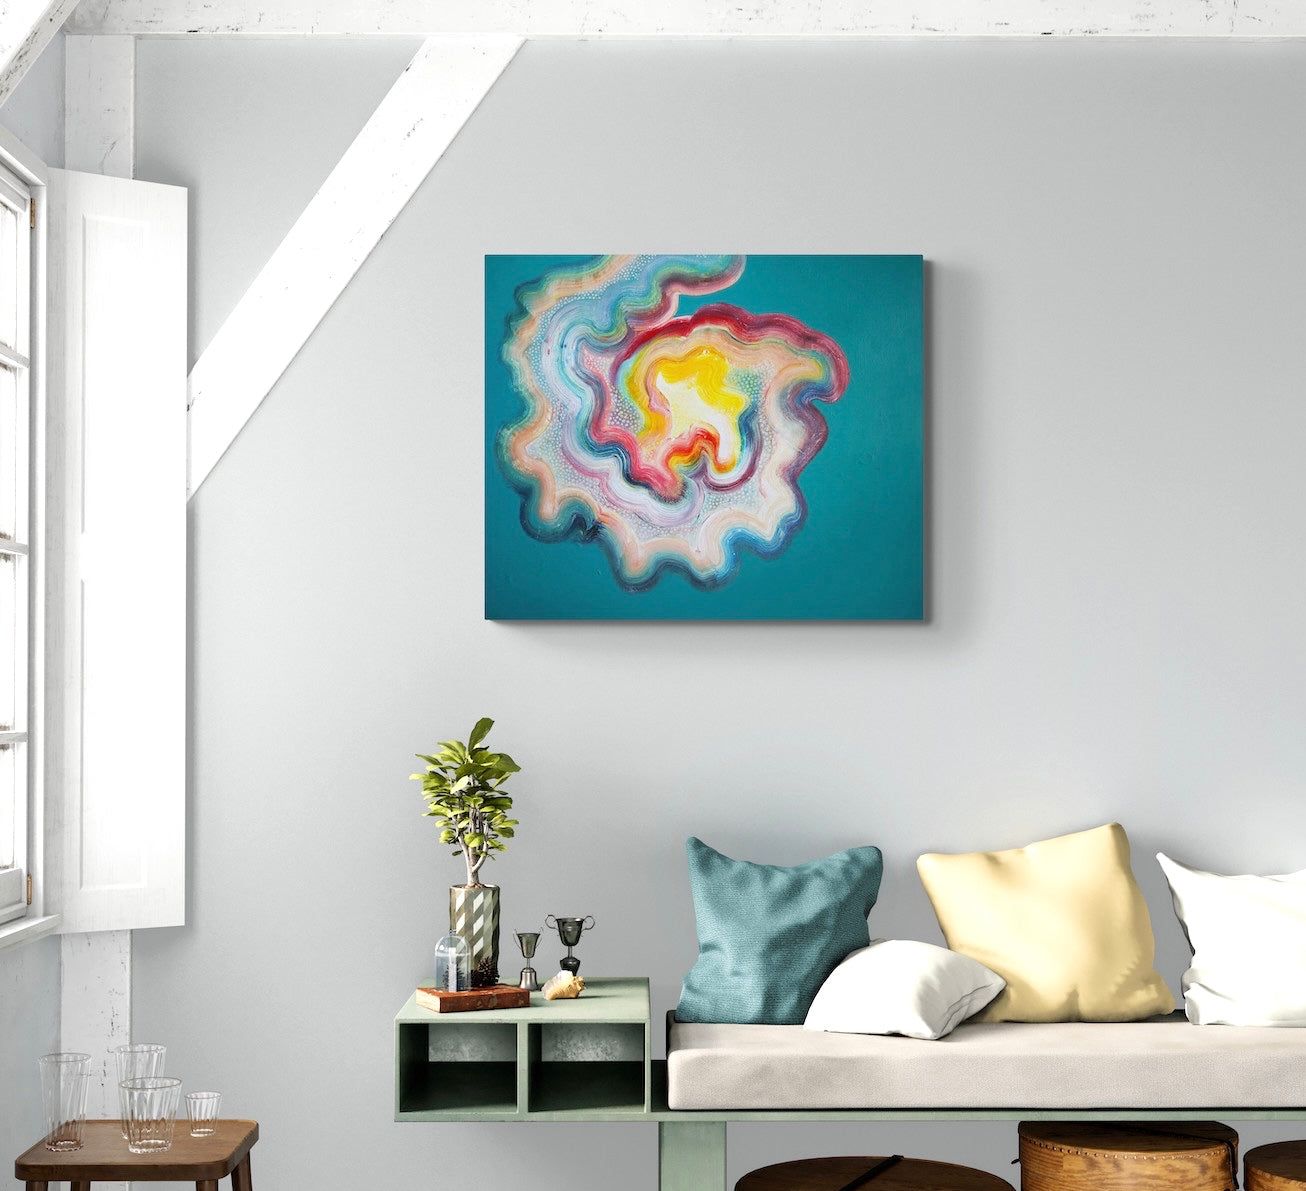 Large abstract painting on canvas full of positive energy